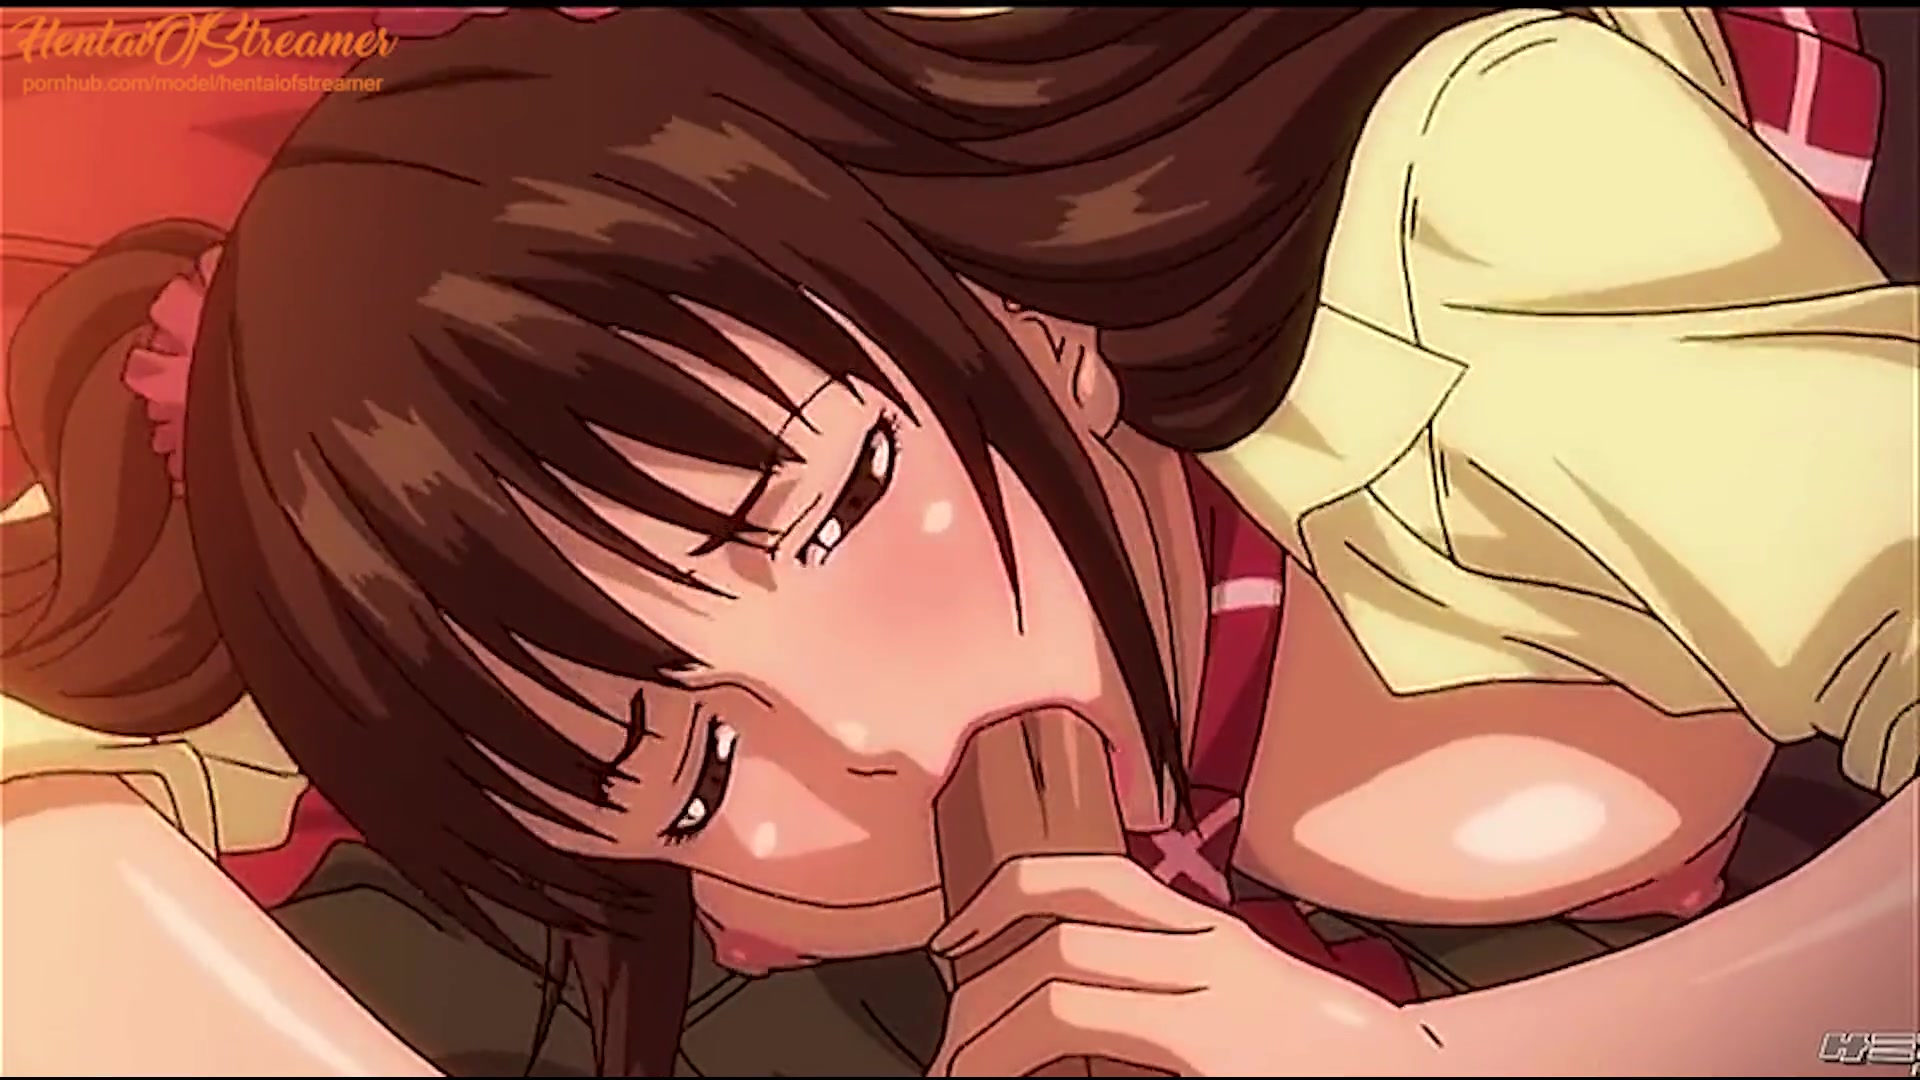 Anime Porn Uncensored | Hotwife Dude Sees his Gf Plumb and Deep-Throat off  another Stud | Anime Porn, Anime - uiPorn.com